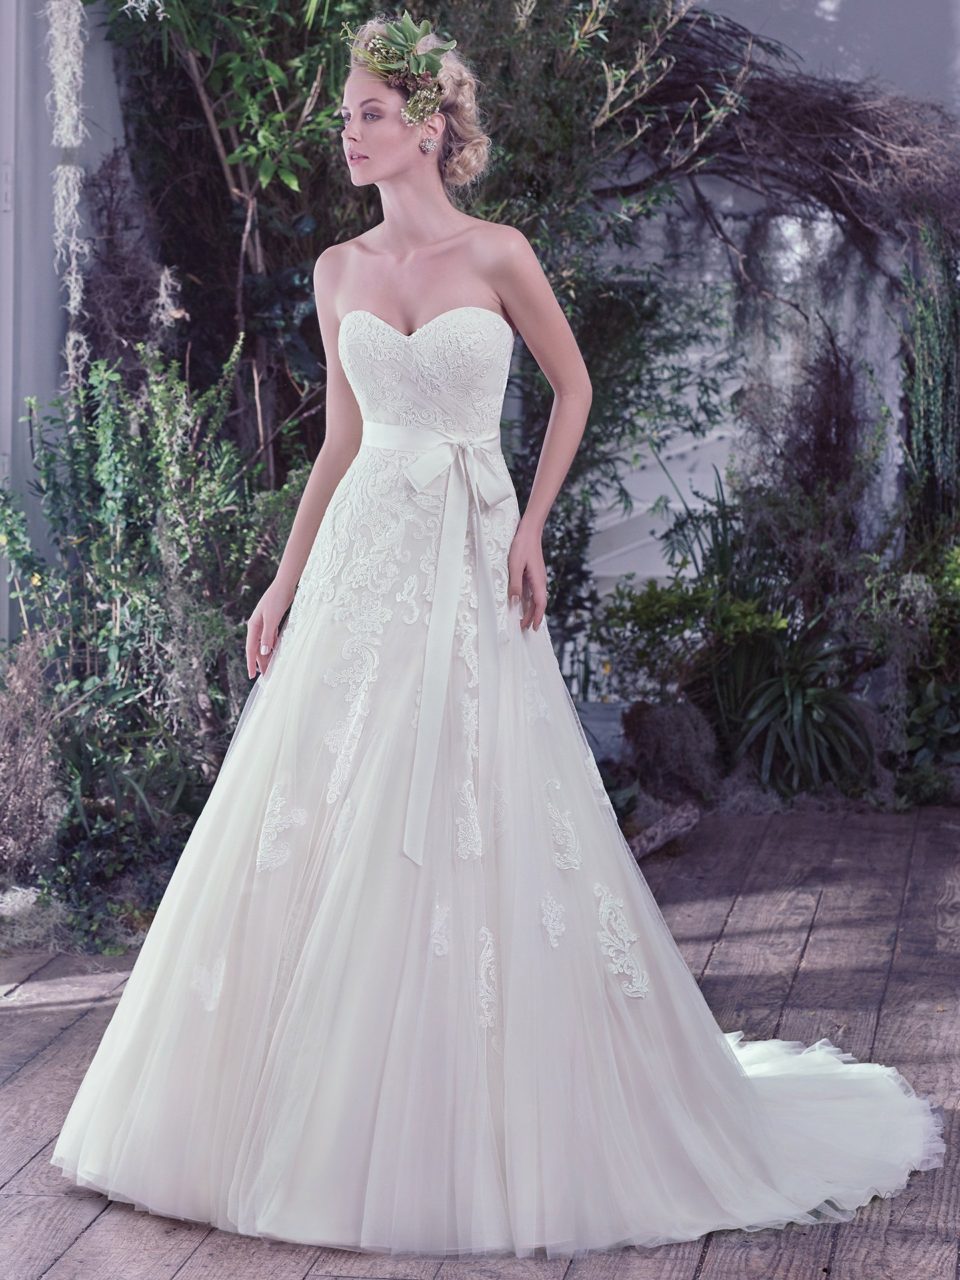 Maggie-Sottero-Lindsey-Lisette-2016-Collection